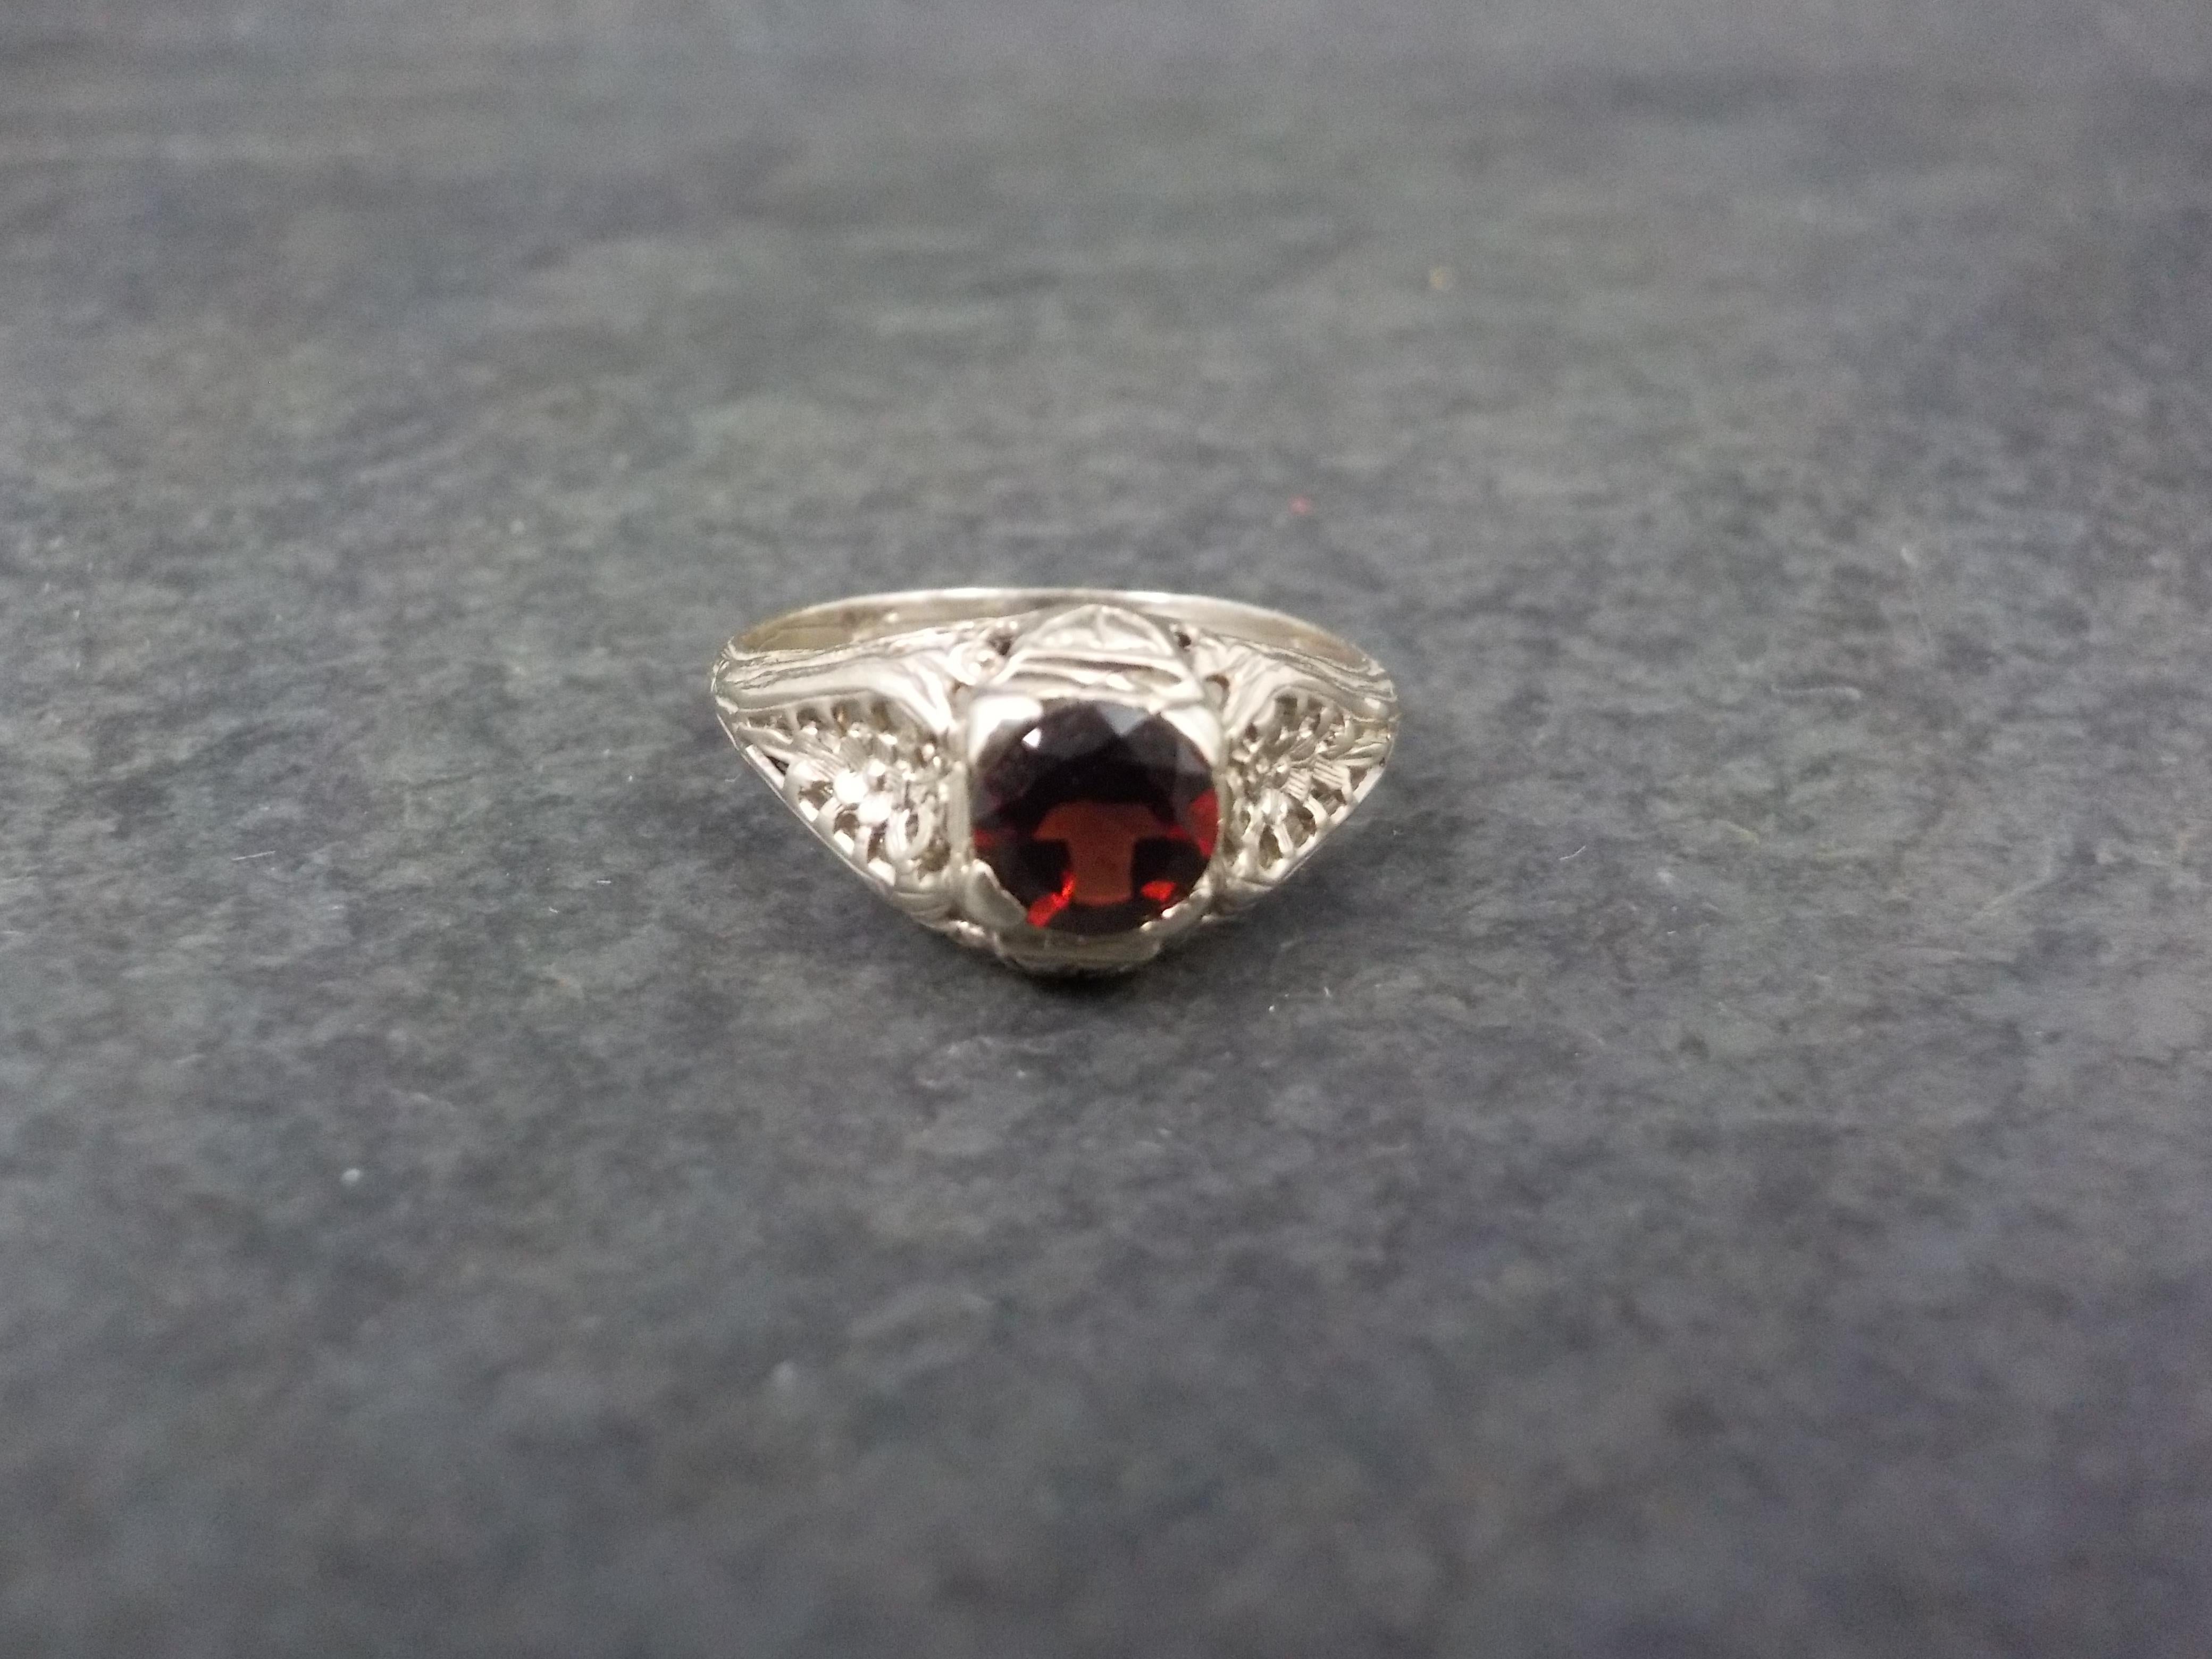 This beautiful vintage ring is 14k white gold. It features a stunning art deco filigree design and a genuine 5mm round garnet gemstone.
The face of this ring measures 5/16 of an inch north to south with a rise of 5mm off the finger.
Size: 5
Marks: